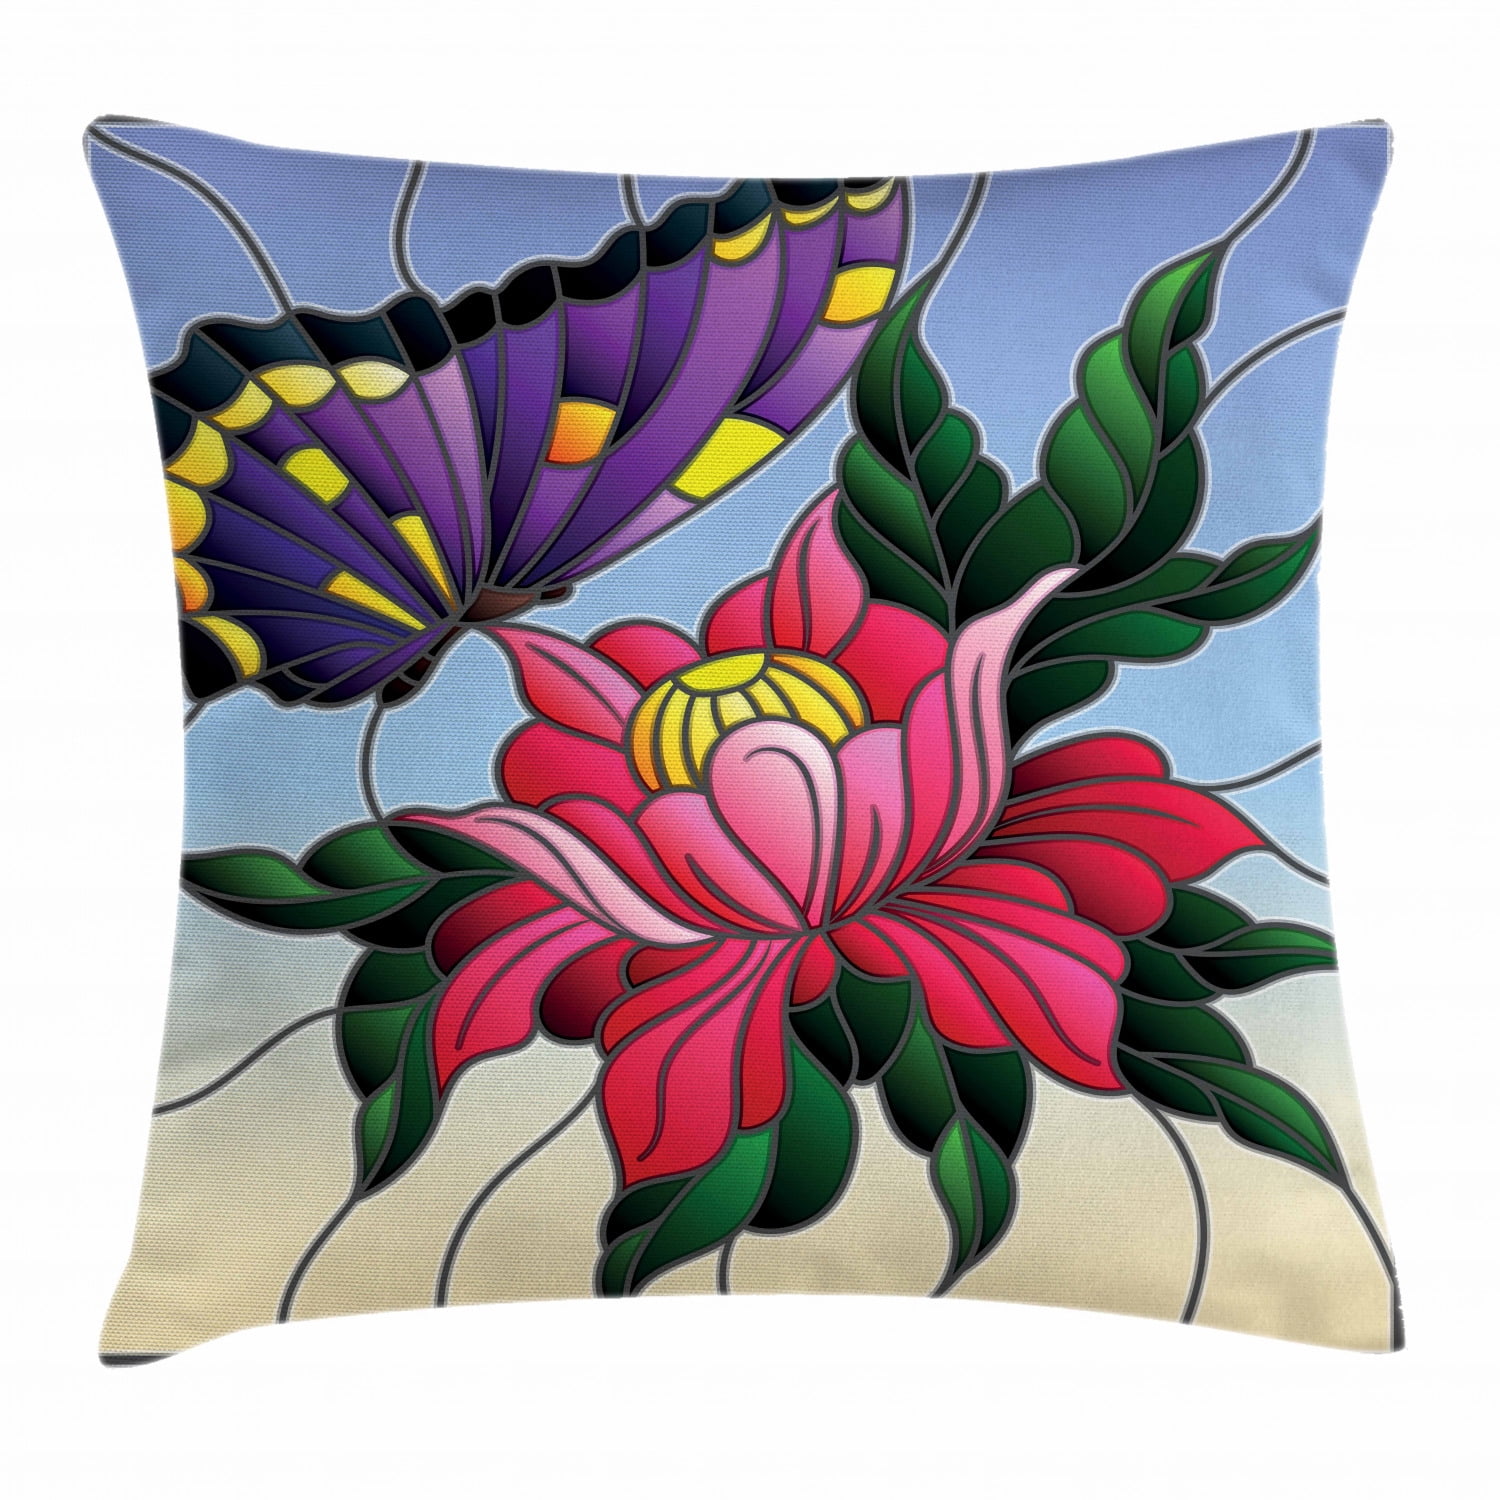 Floral Butterfly Digital Print Cushion Cover Multicolor Square Pillow Case Throw 